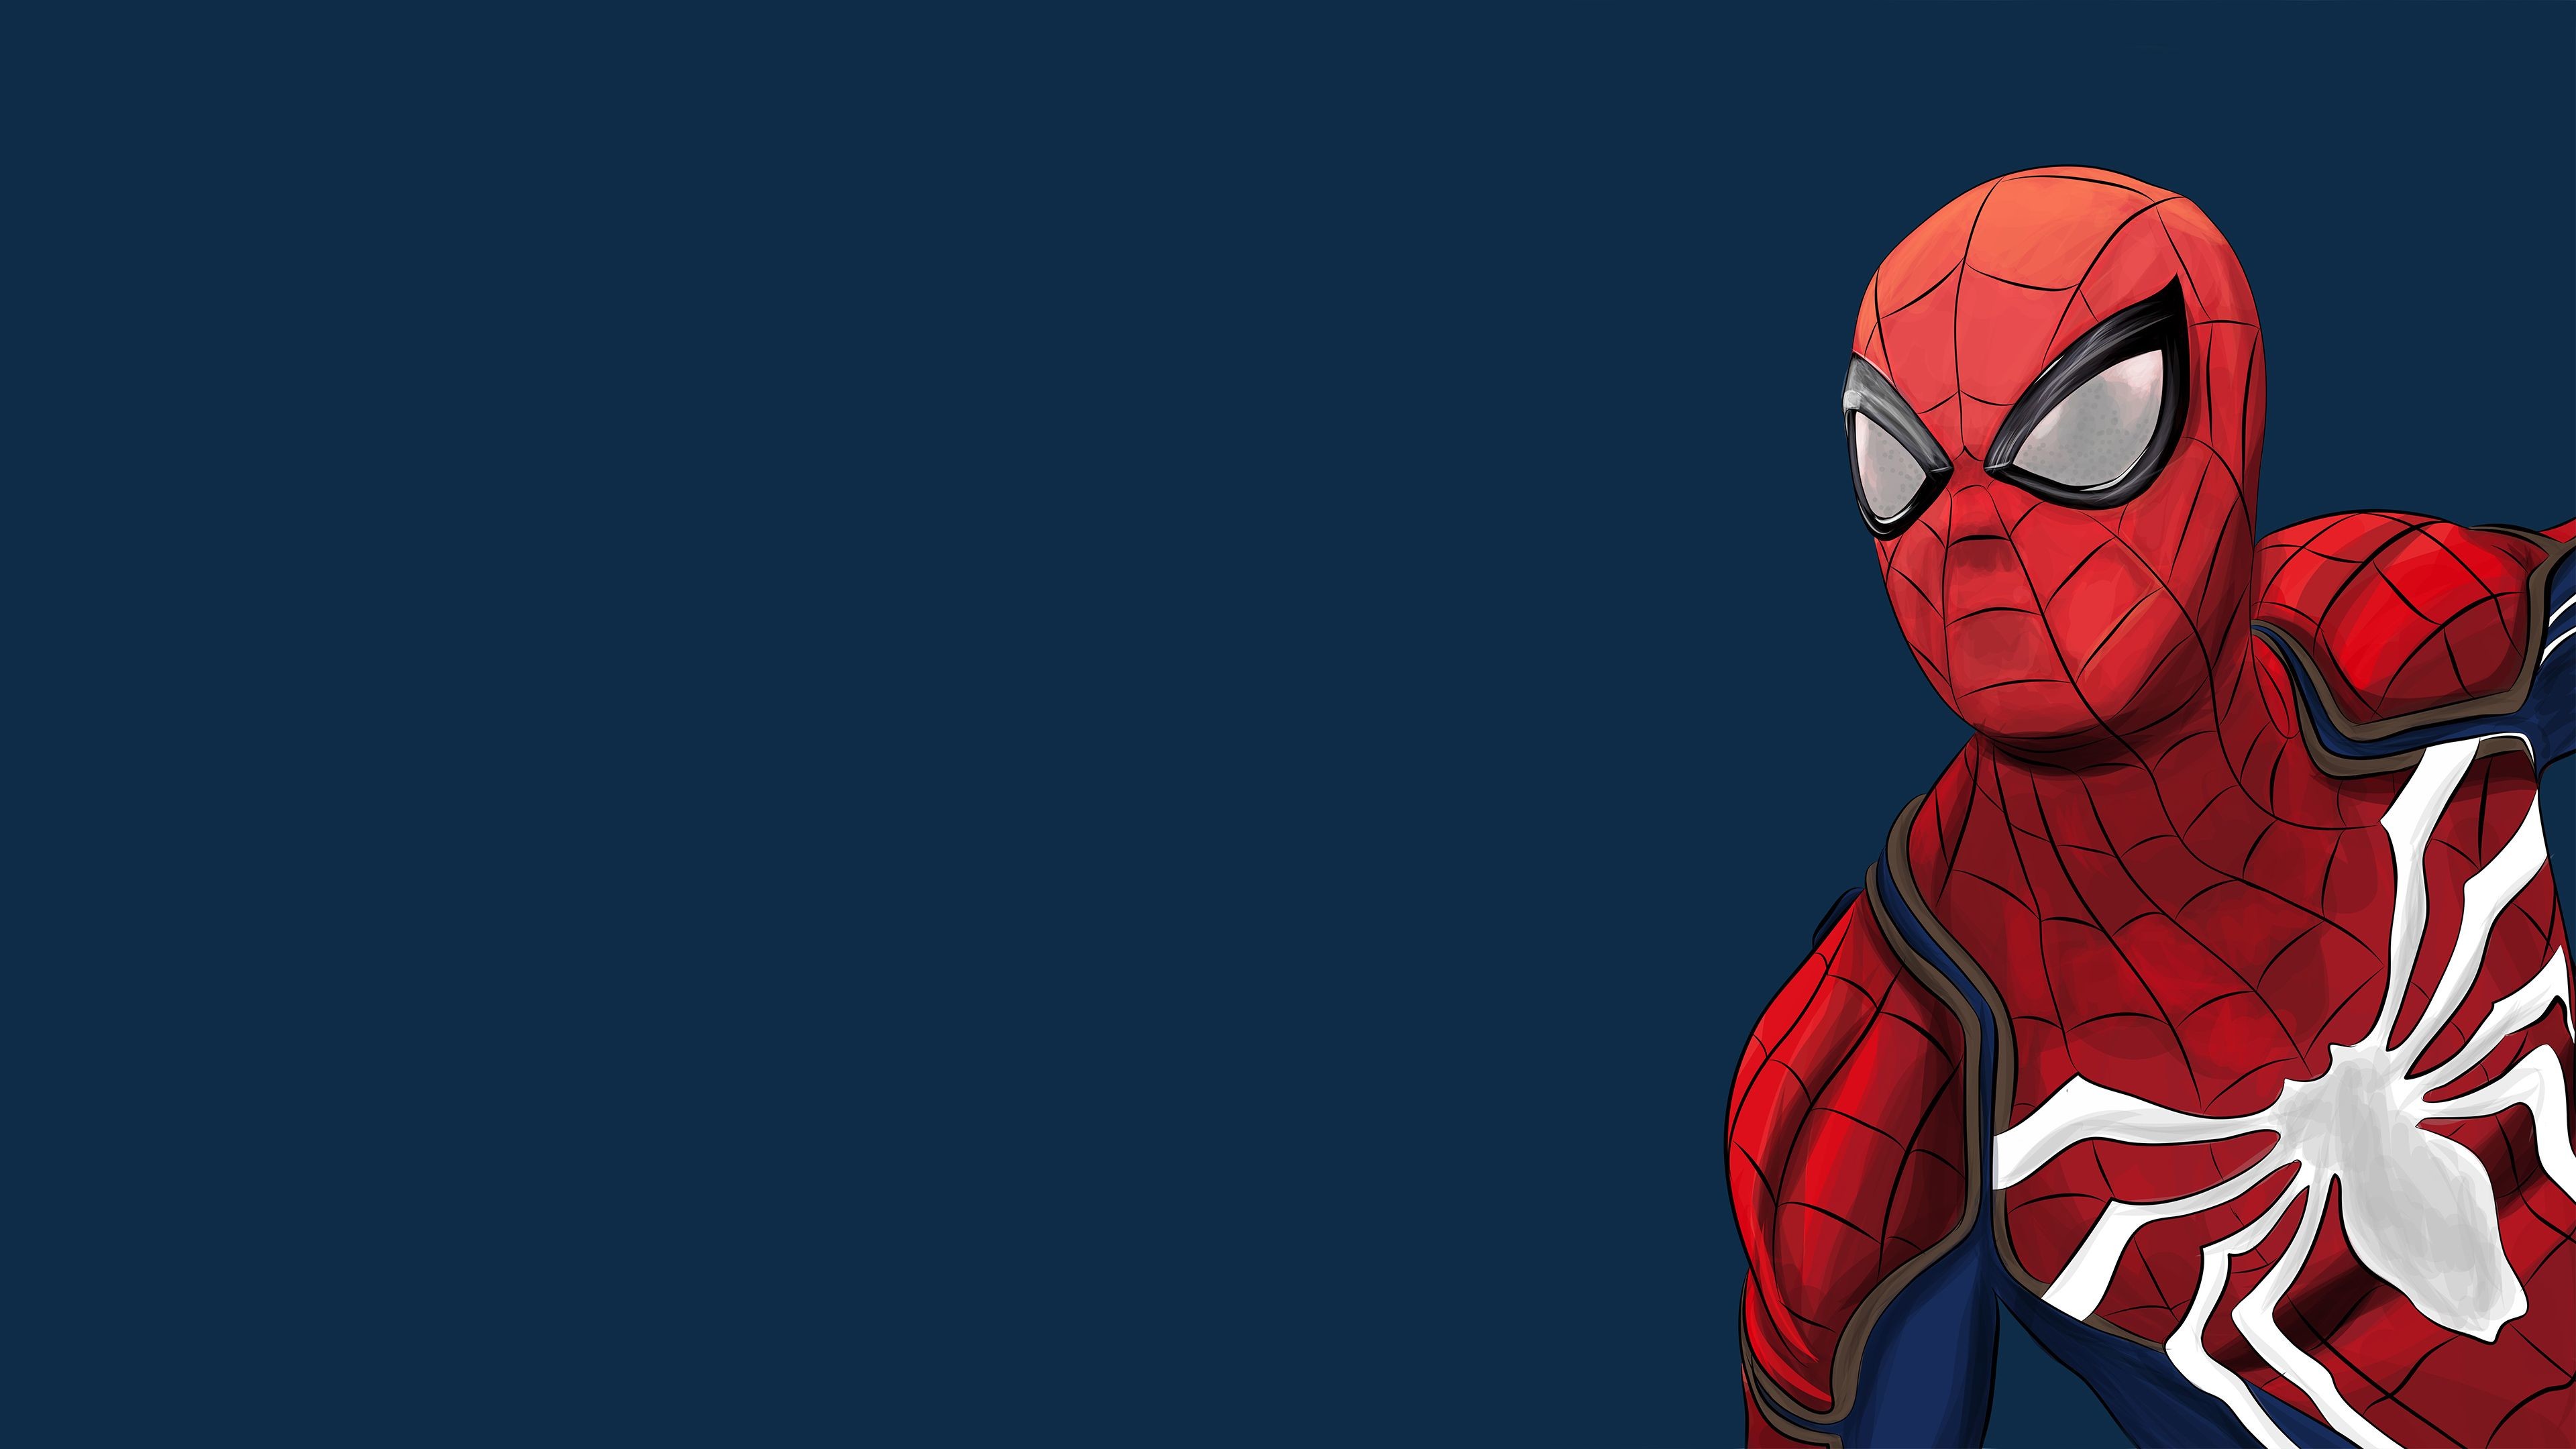 75 Spiderman Wallpapers On Wallpaperplay , HD Wallpaper & Backgrounds